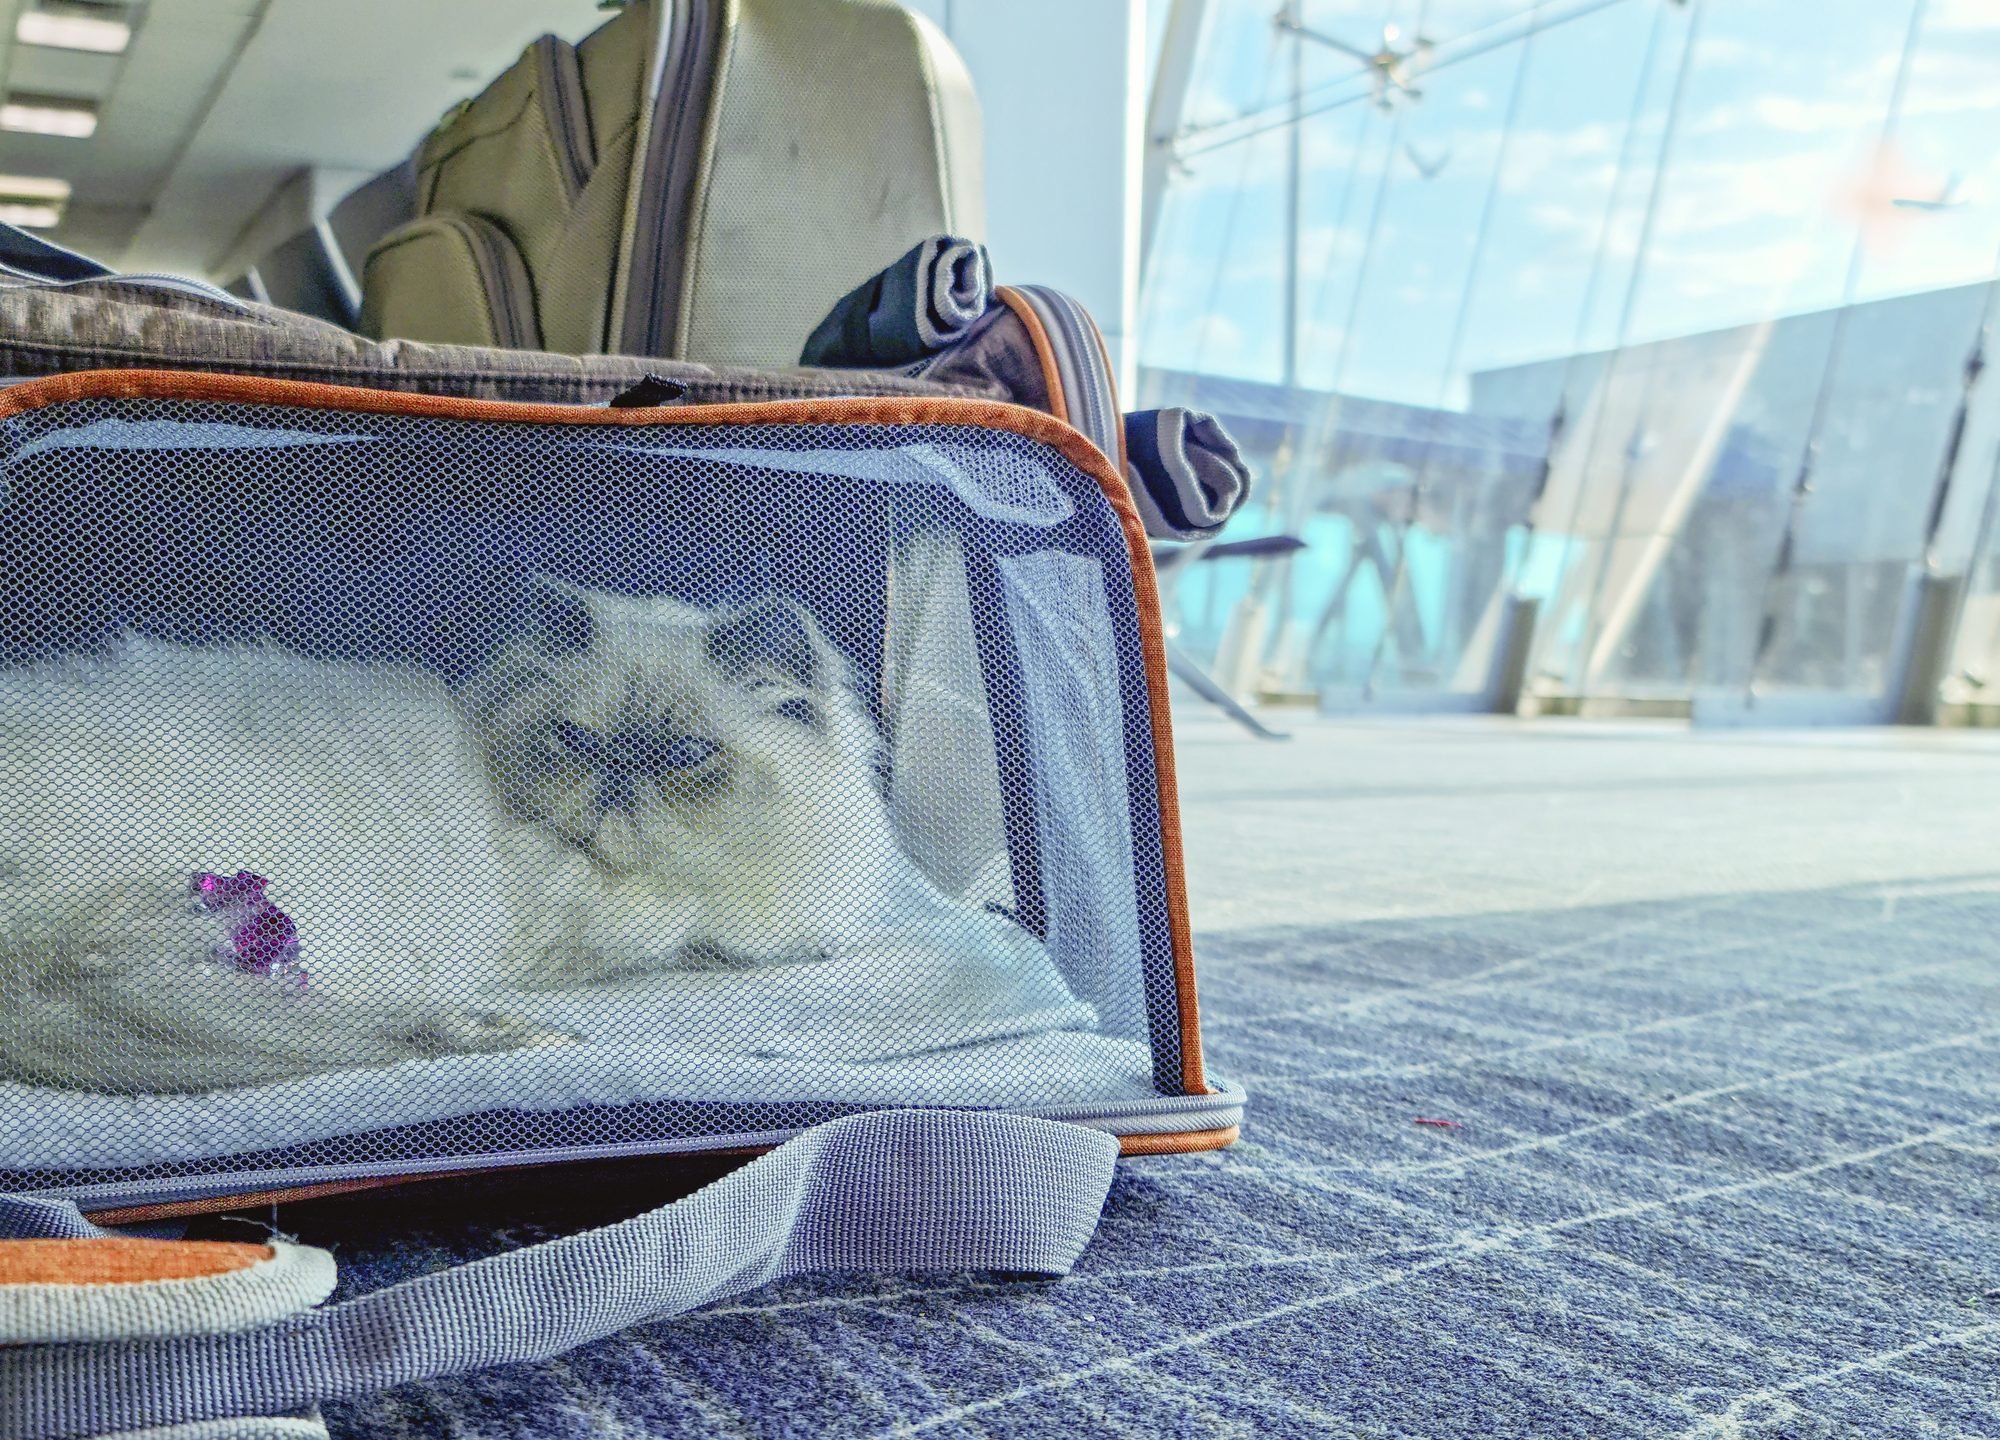 This Airline-approved Pet Carrier Is a Must-have